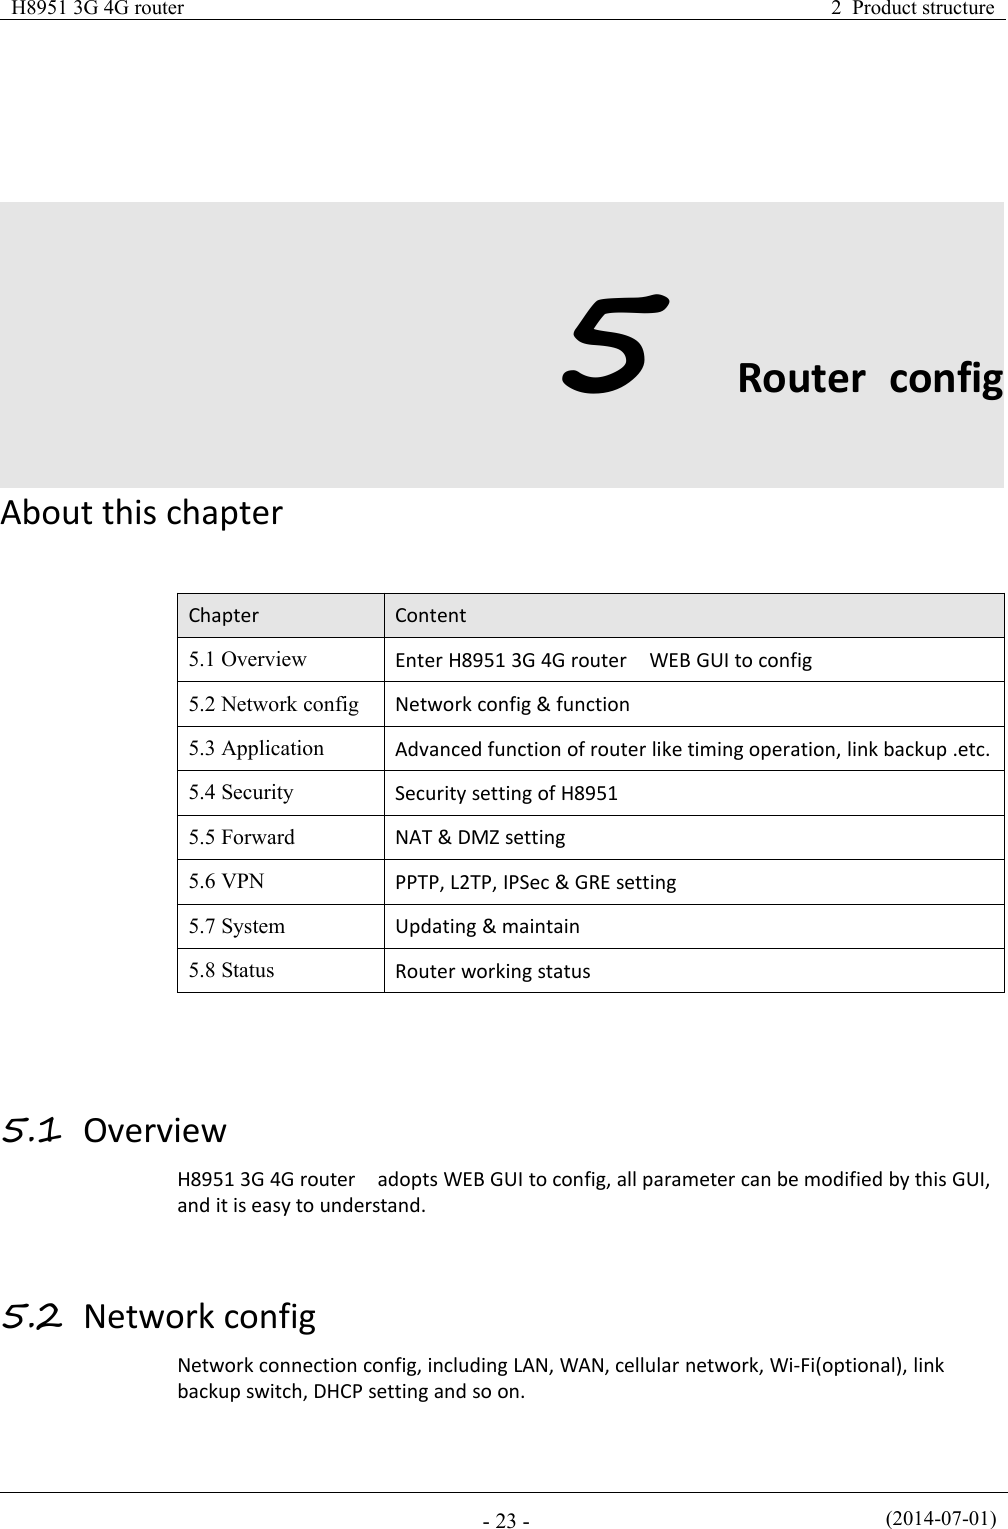 H8951 3G 4G router2 Product structure(2014-07-01)- 23 -5Router configAbout this chapterChapterContent5.1 OverviewEnter H8951 3G 4G router WEB GUI to config5.2 Network configNetwork config &amp; function5.3 ApplicationAdvanced function of router like timing operation, link backup .etc.5.4 SecuritySecurity setting of H89515.5 ForwardNAT &amp; DMZ setting5.6 VPNPPTP, L2TP, IPSec &amp; GRE setting5.7 SystemUpdating &amp; maintain5.8 StatusRouter working status5.1 OverviewH8951 3G 4G router adopts WEB GUI to config, all parameter can be modified by this GUI,and it is easy to understand.5.2 Network configNetwork connection config, including LAN, WAN, cellular network, Wi-Fi(optional), linkbackup switch, DHCP setting and so on.